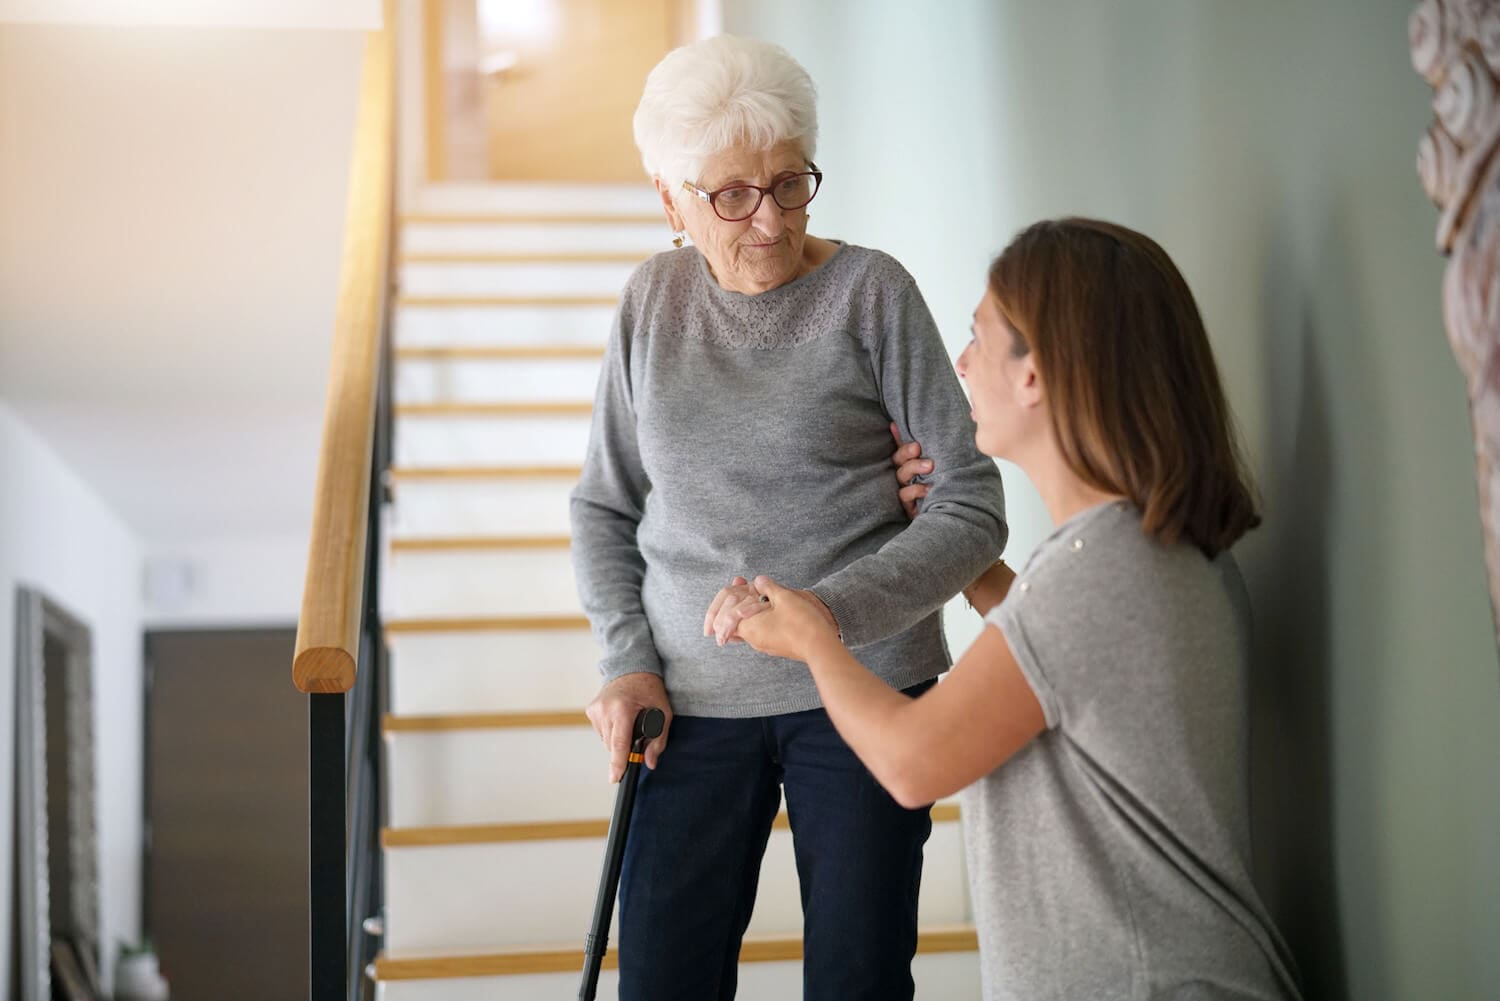 Elderly Lady | Home Care Assistance in St Louis, MO